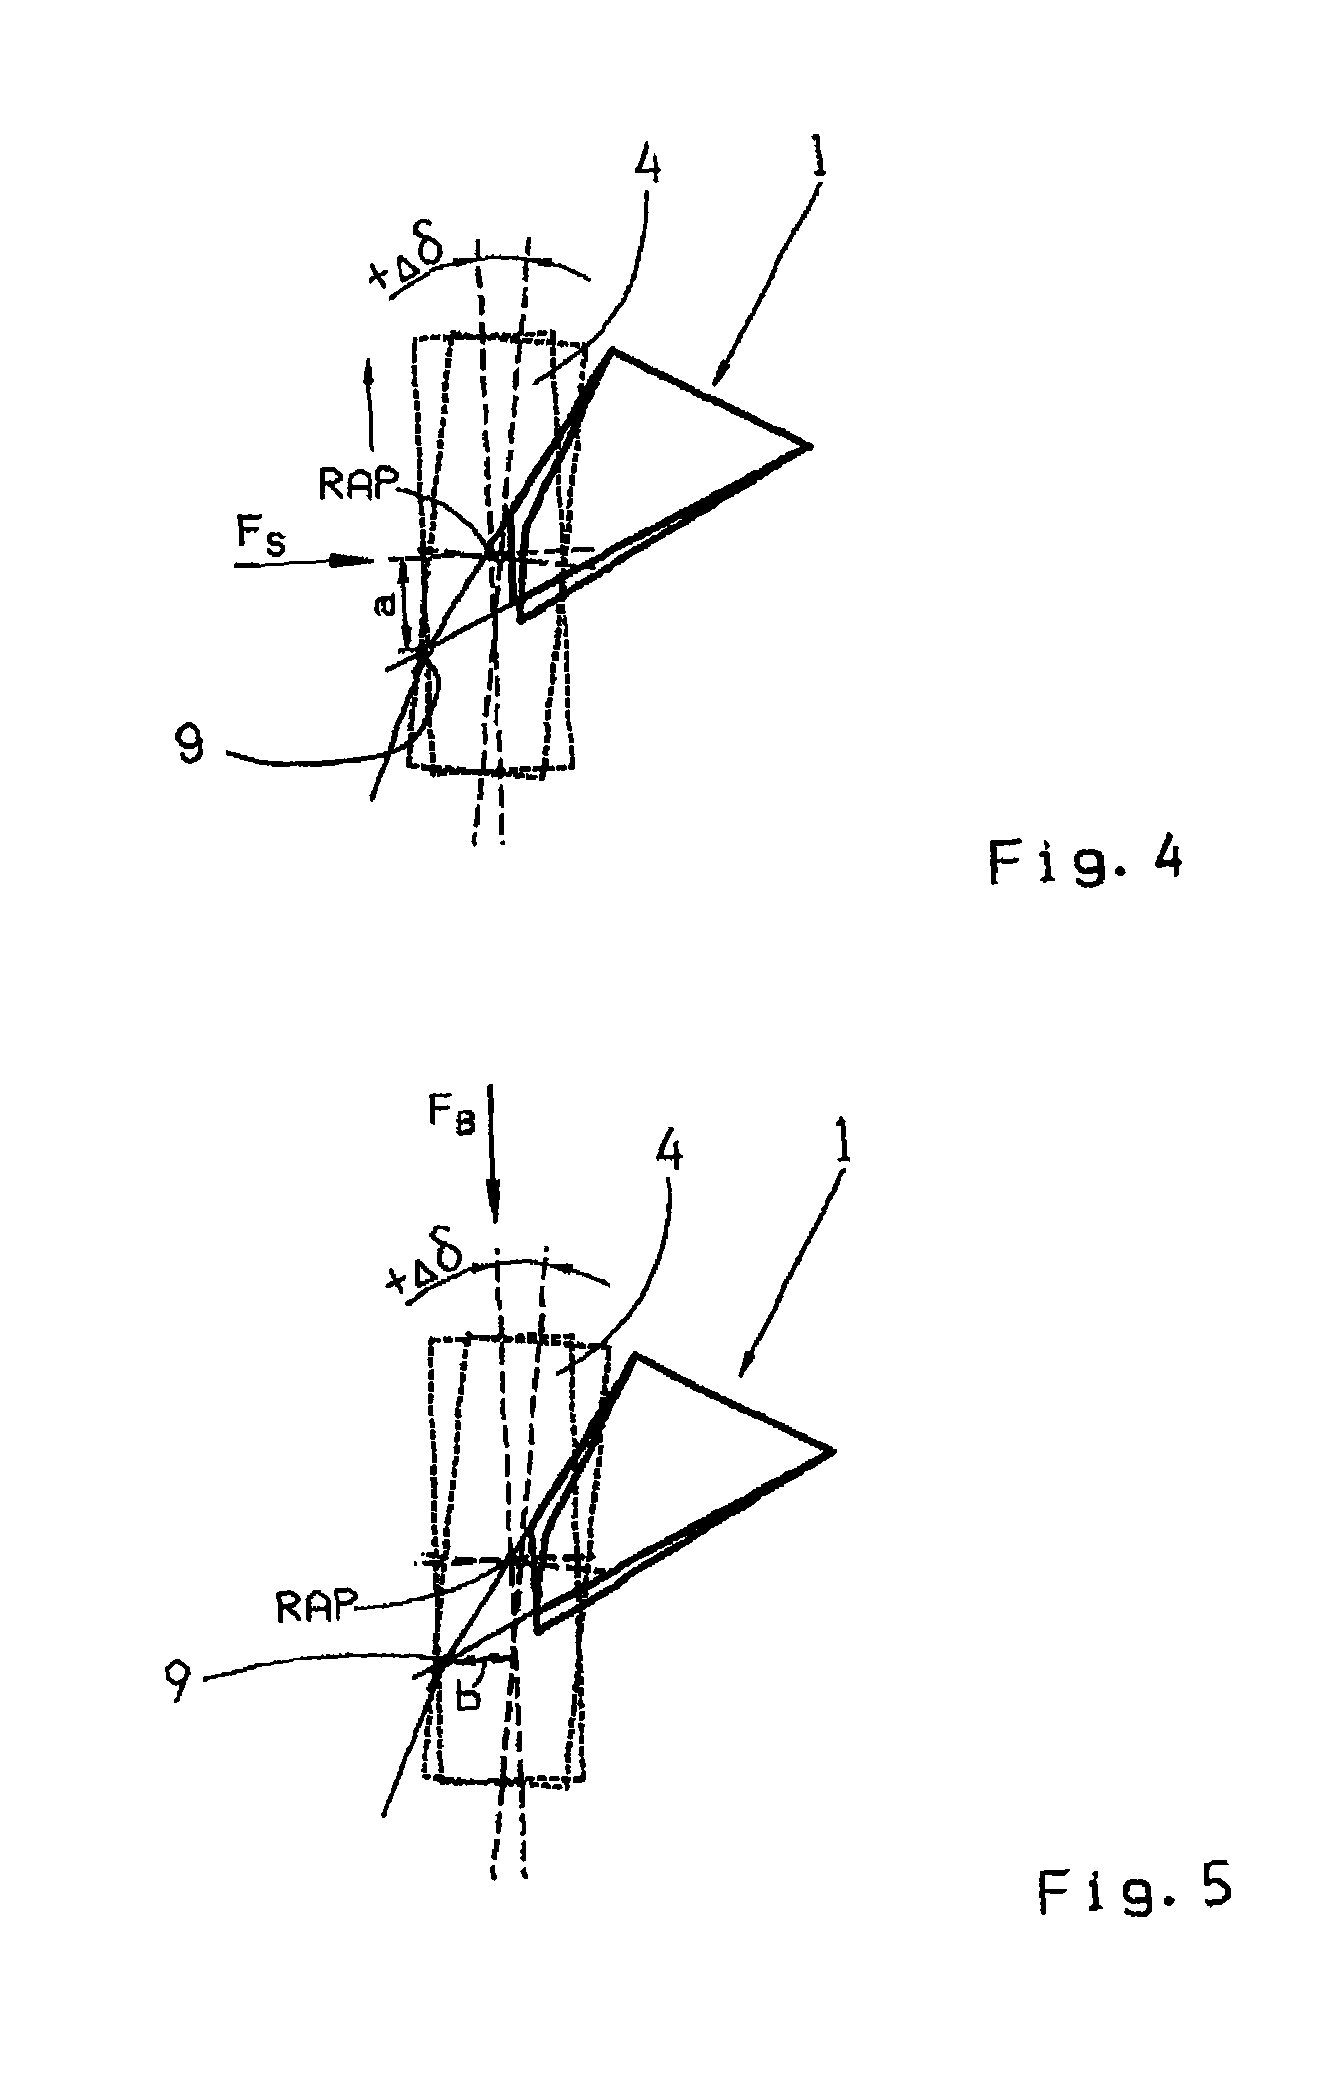 Semi-trailing arm axle for a motor vehicle